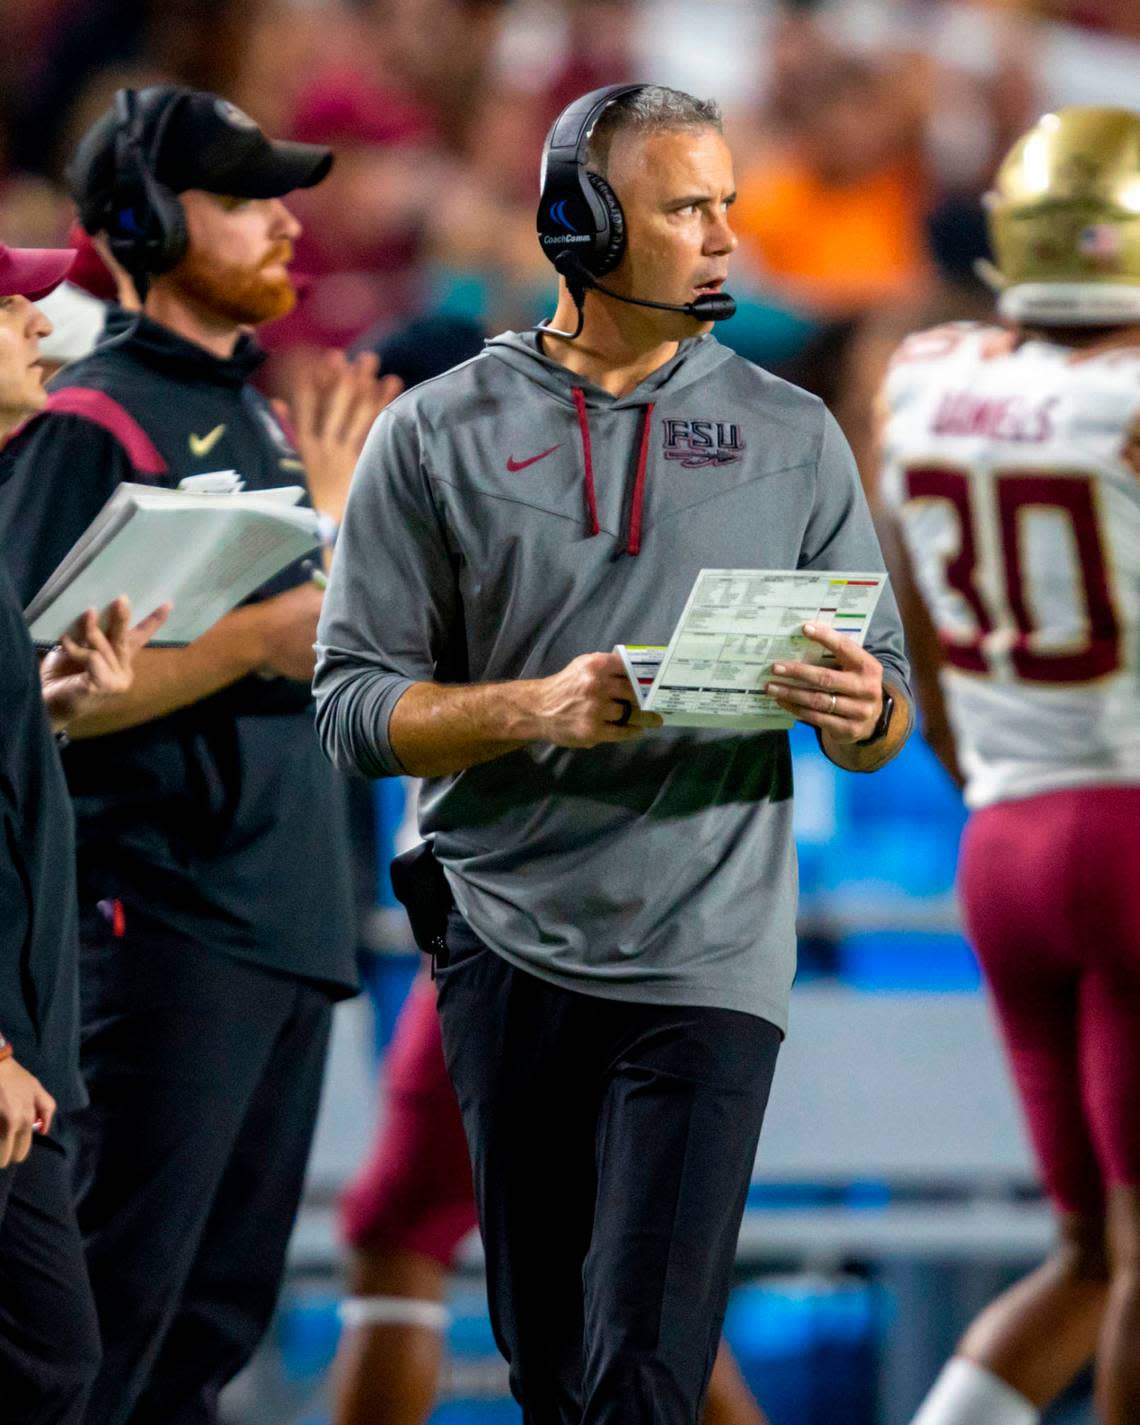 Florida State University head coach Mike Norvell reacts on the sidelines during the first quarter of an ACC football game against University of Miami at Hard Rock Stadium in Miami Gardens on Saturday, November 5, 2022.